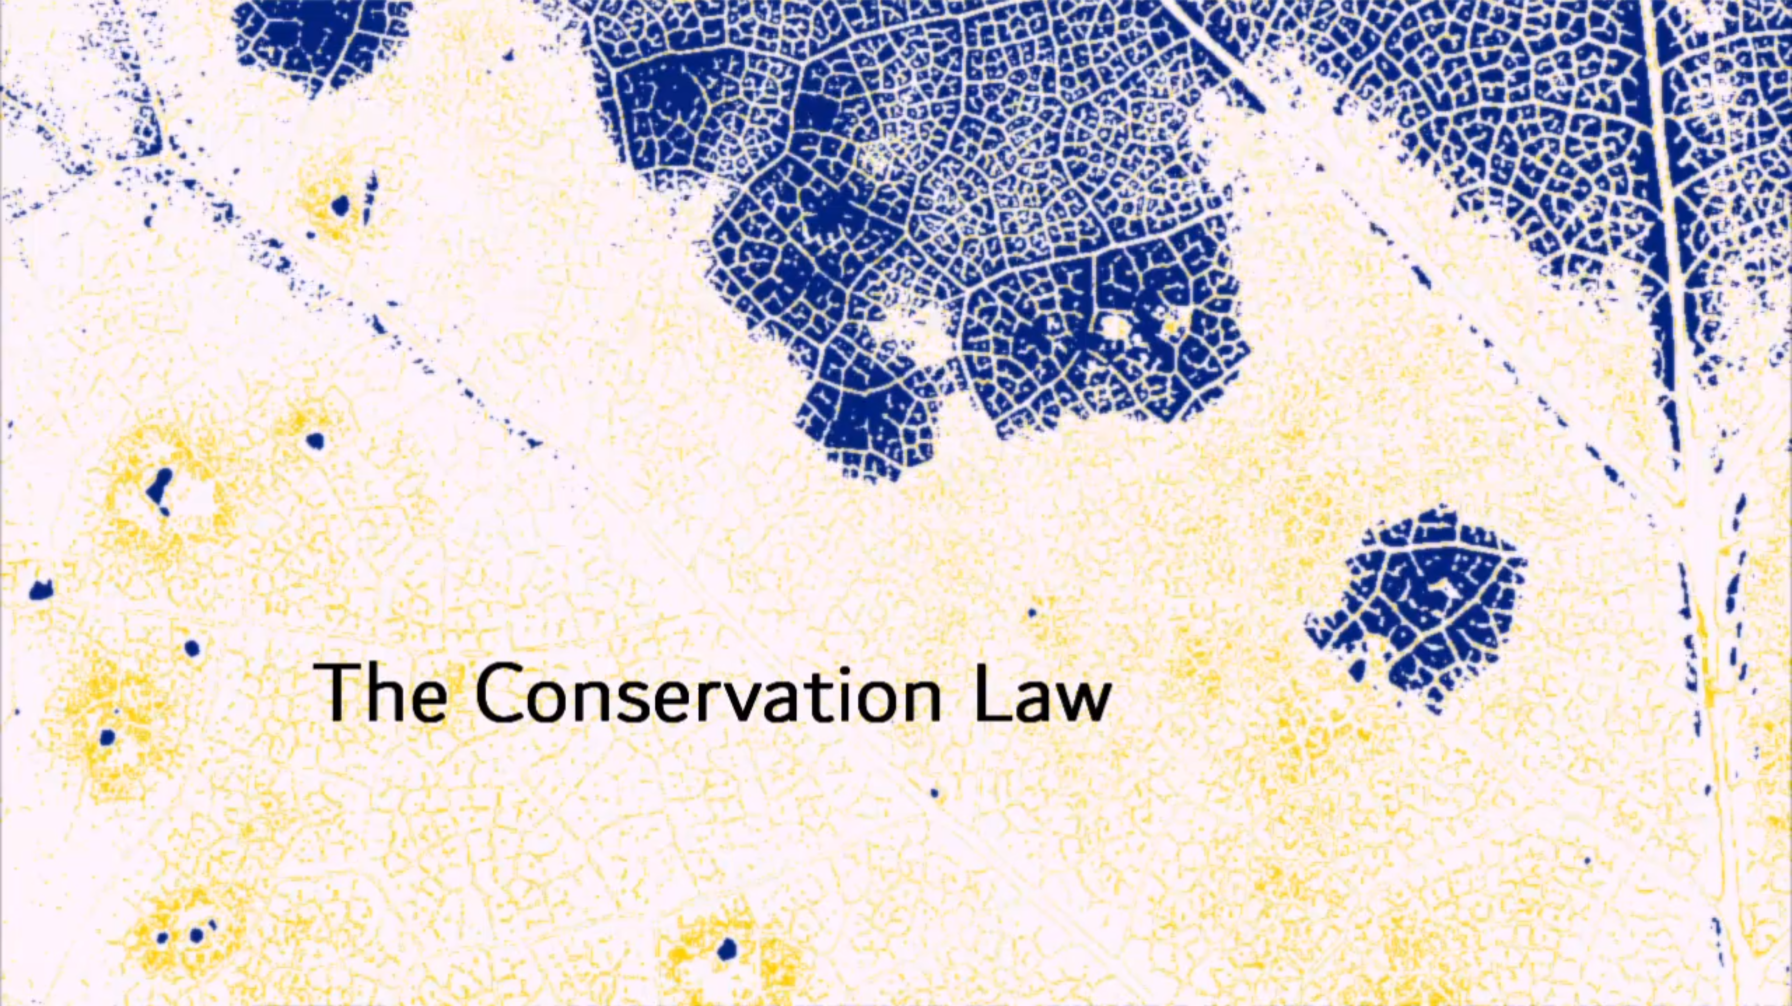 The Conservation Law